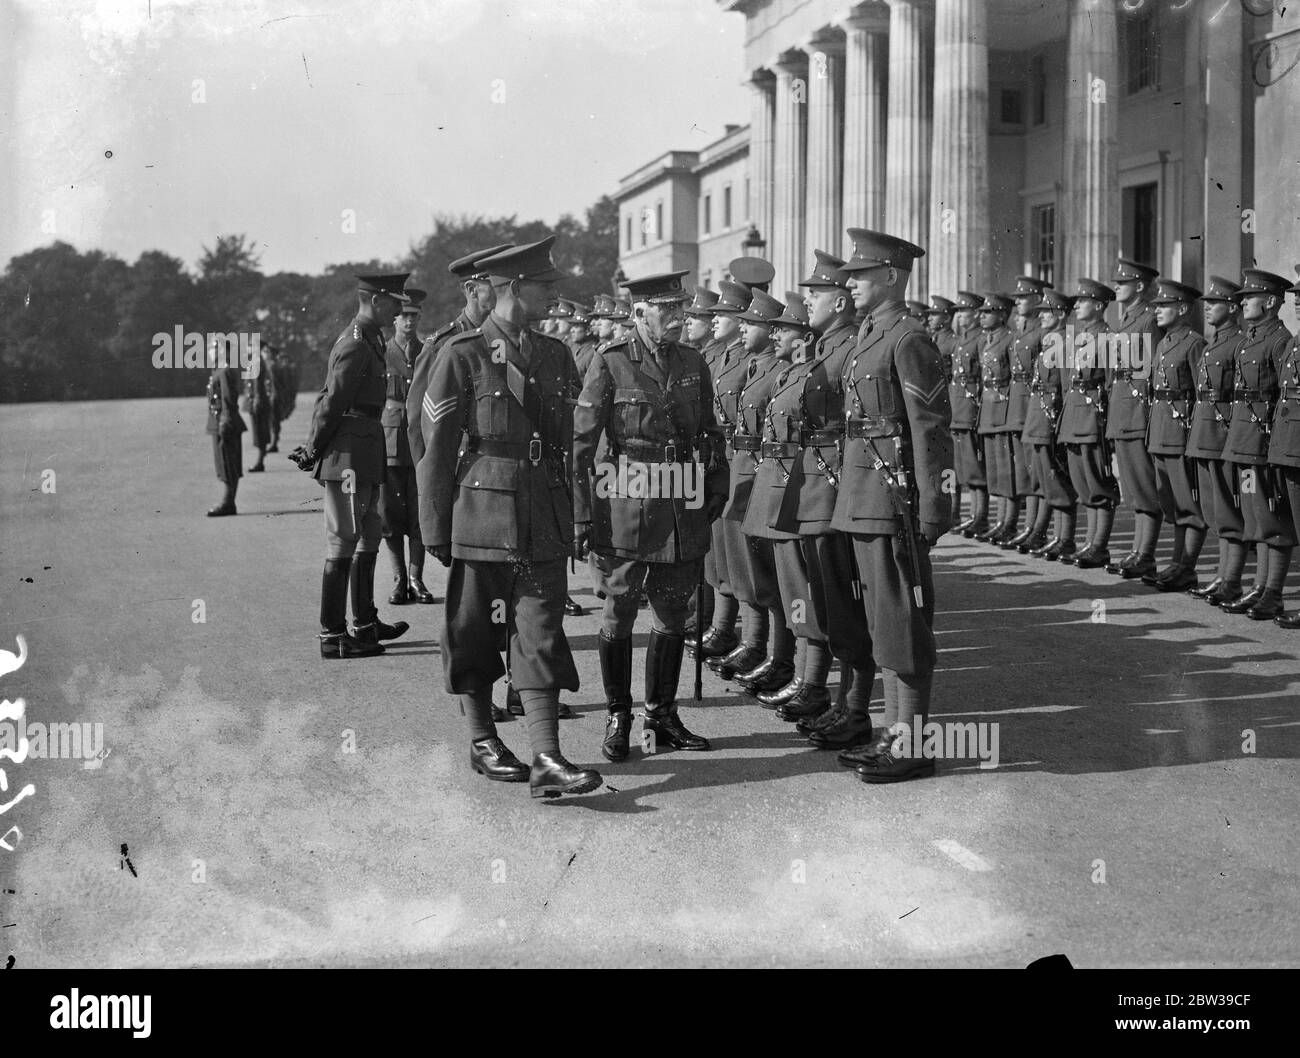 Duke of Connaught inspects cadets at Royal Military College , Sandhurst . The Duke of Connaught made his annual inspection of the Gentlemen cadets at the Royal Military College Sandhurst , Camberley , Surrey . Photo shows ; The Duke of Connaught inspecting the senior cadets at the college . 18 September 1933 30s, 30's, 1930s, 1930's, thirties, nineteen thirties Stock Photo